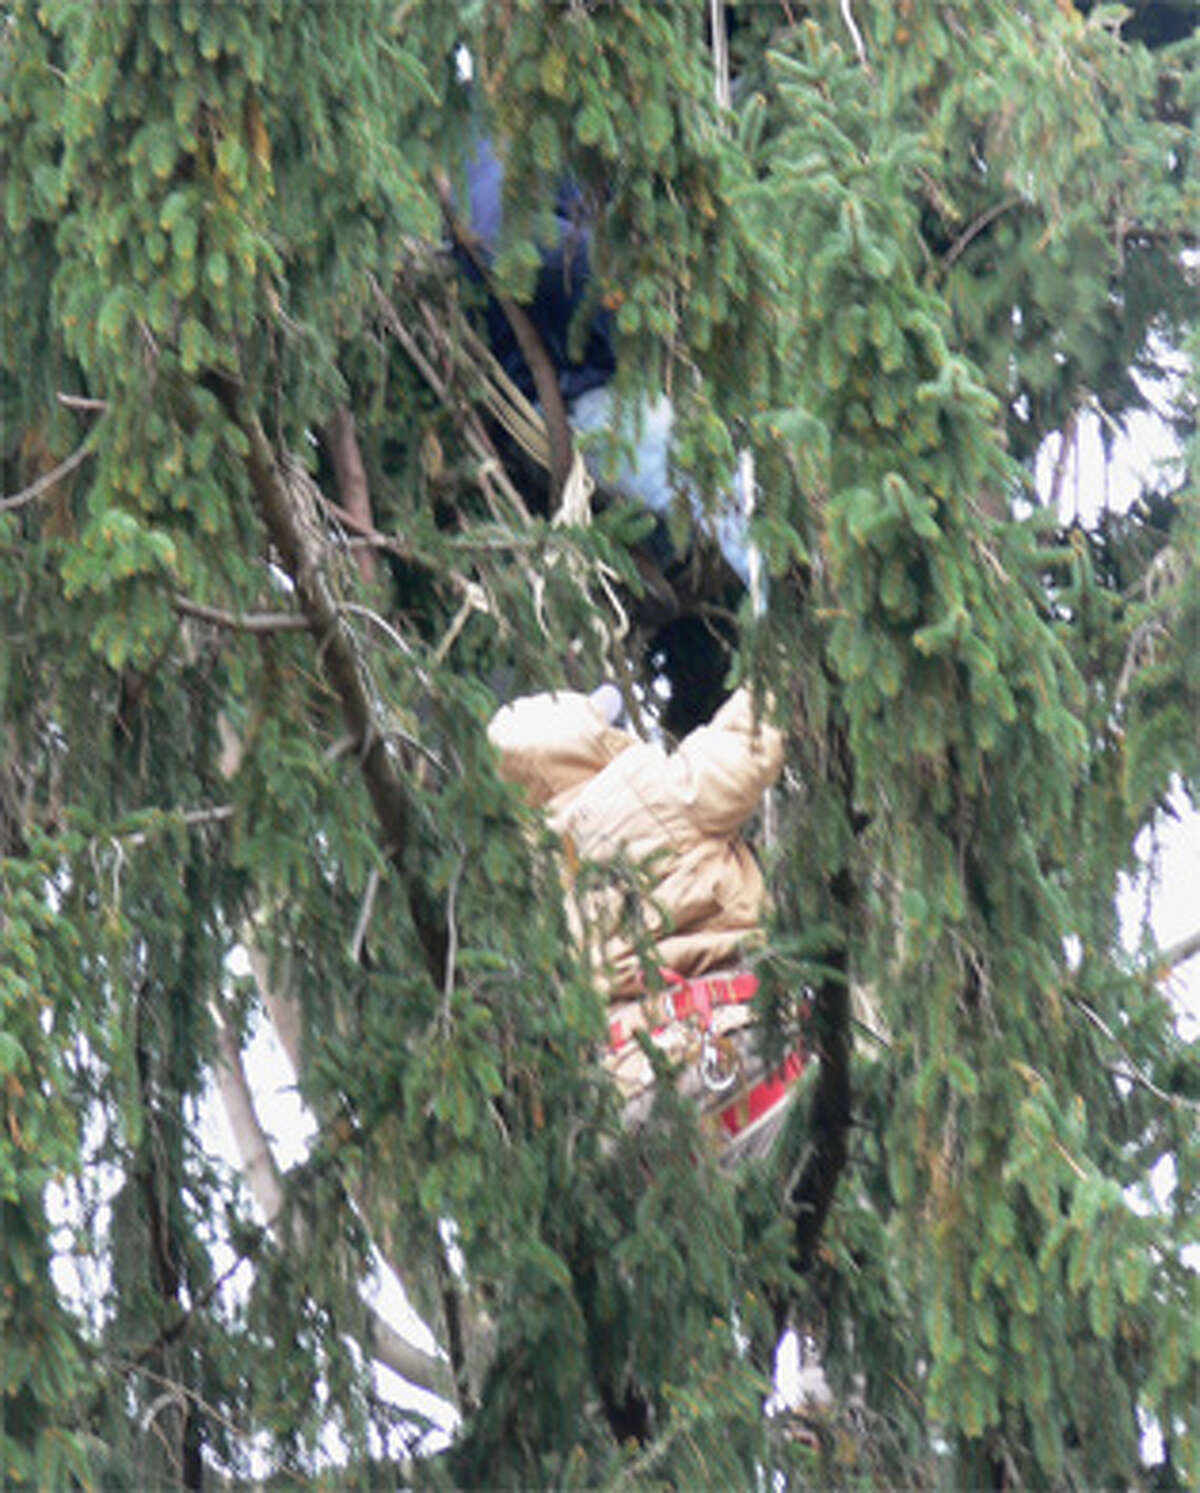 Two workers about 50 feet up in the Shelton tree on Wednesday early afternoon.